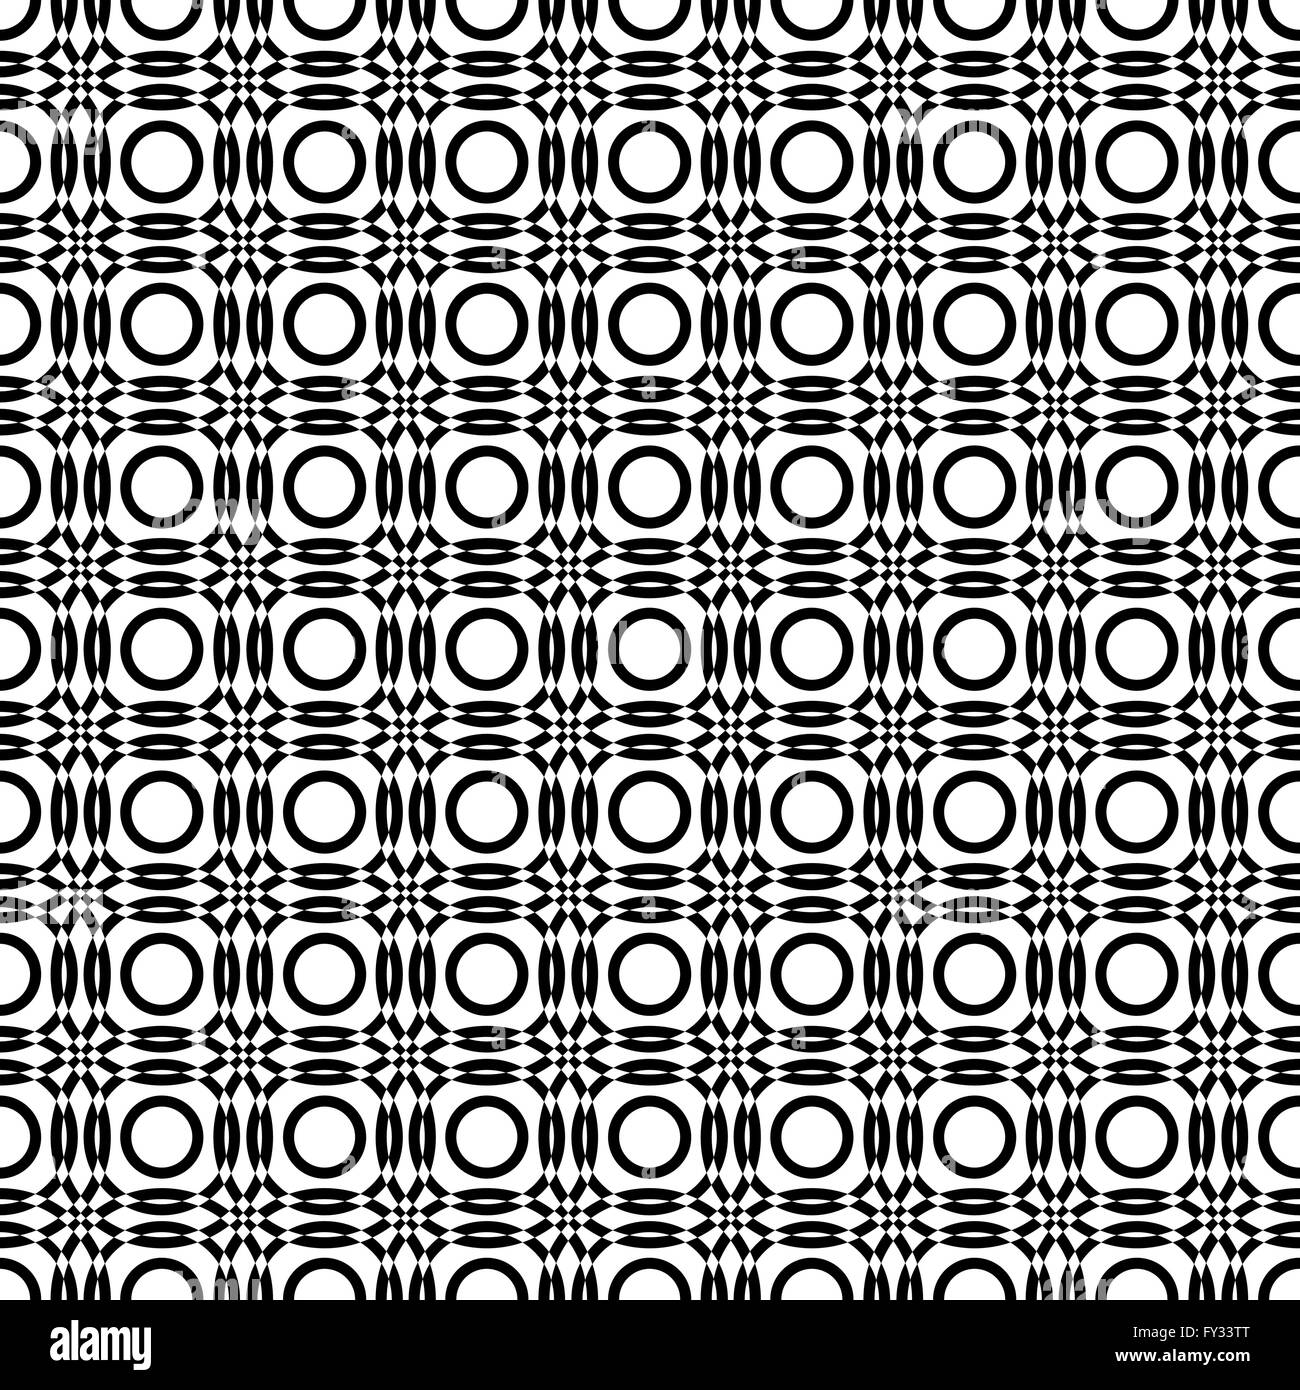 Seamless vector pattern with black and white overlapping circles Stock Vector